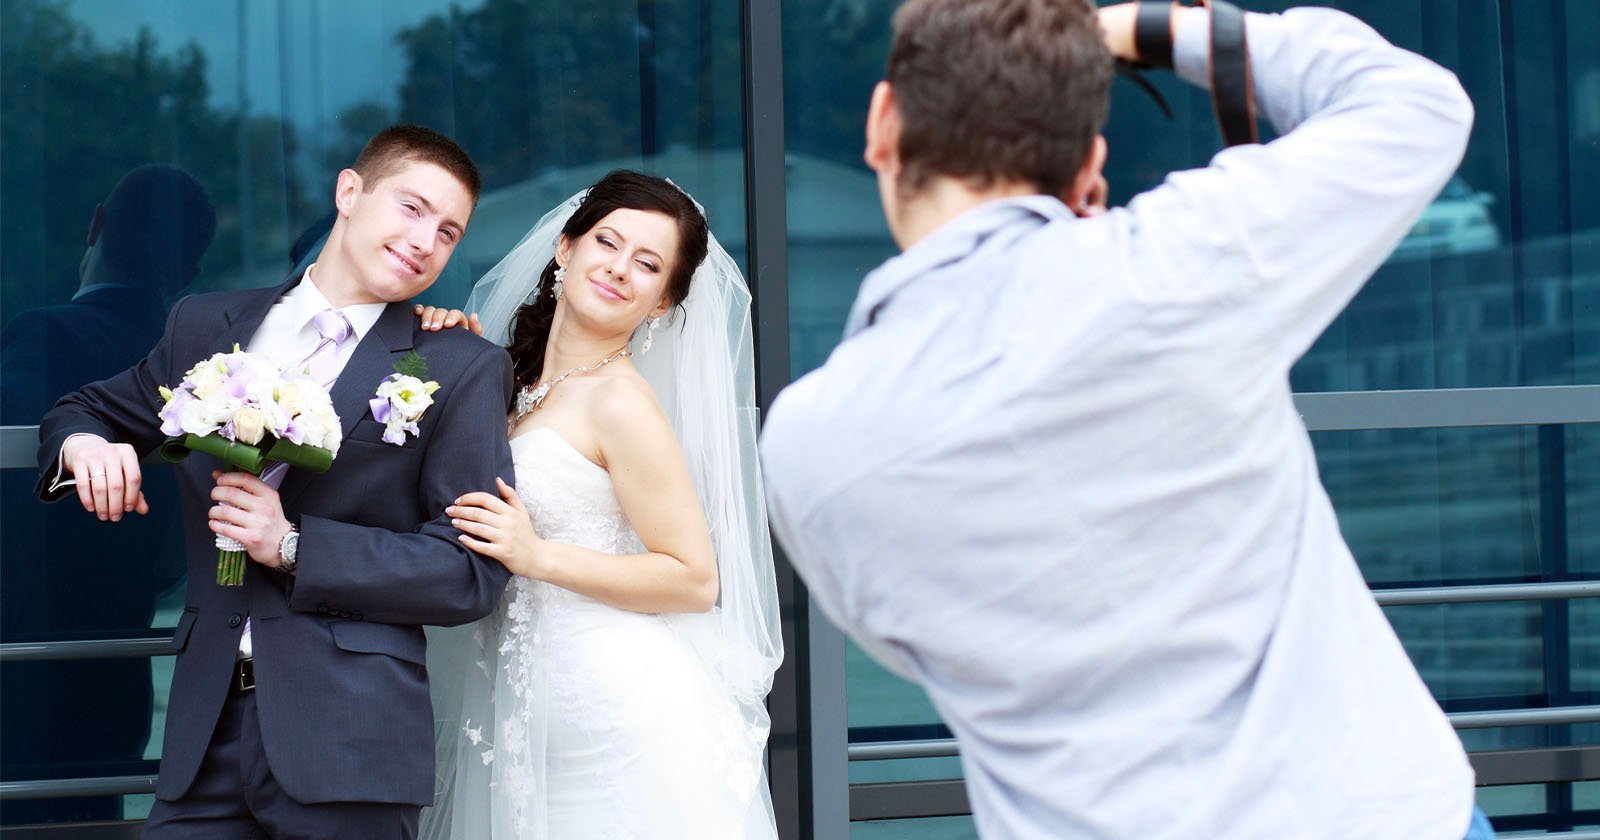 Photographer Tells Couple Hes Lost Wedding Photos, Then Disappears